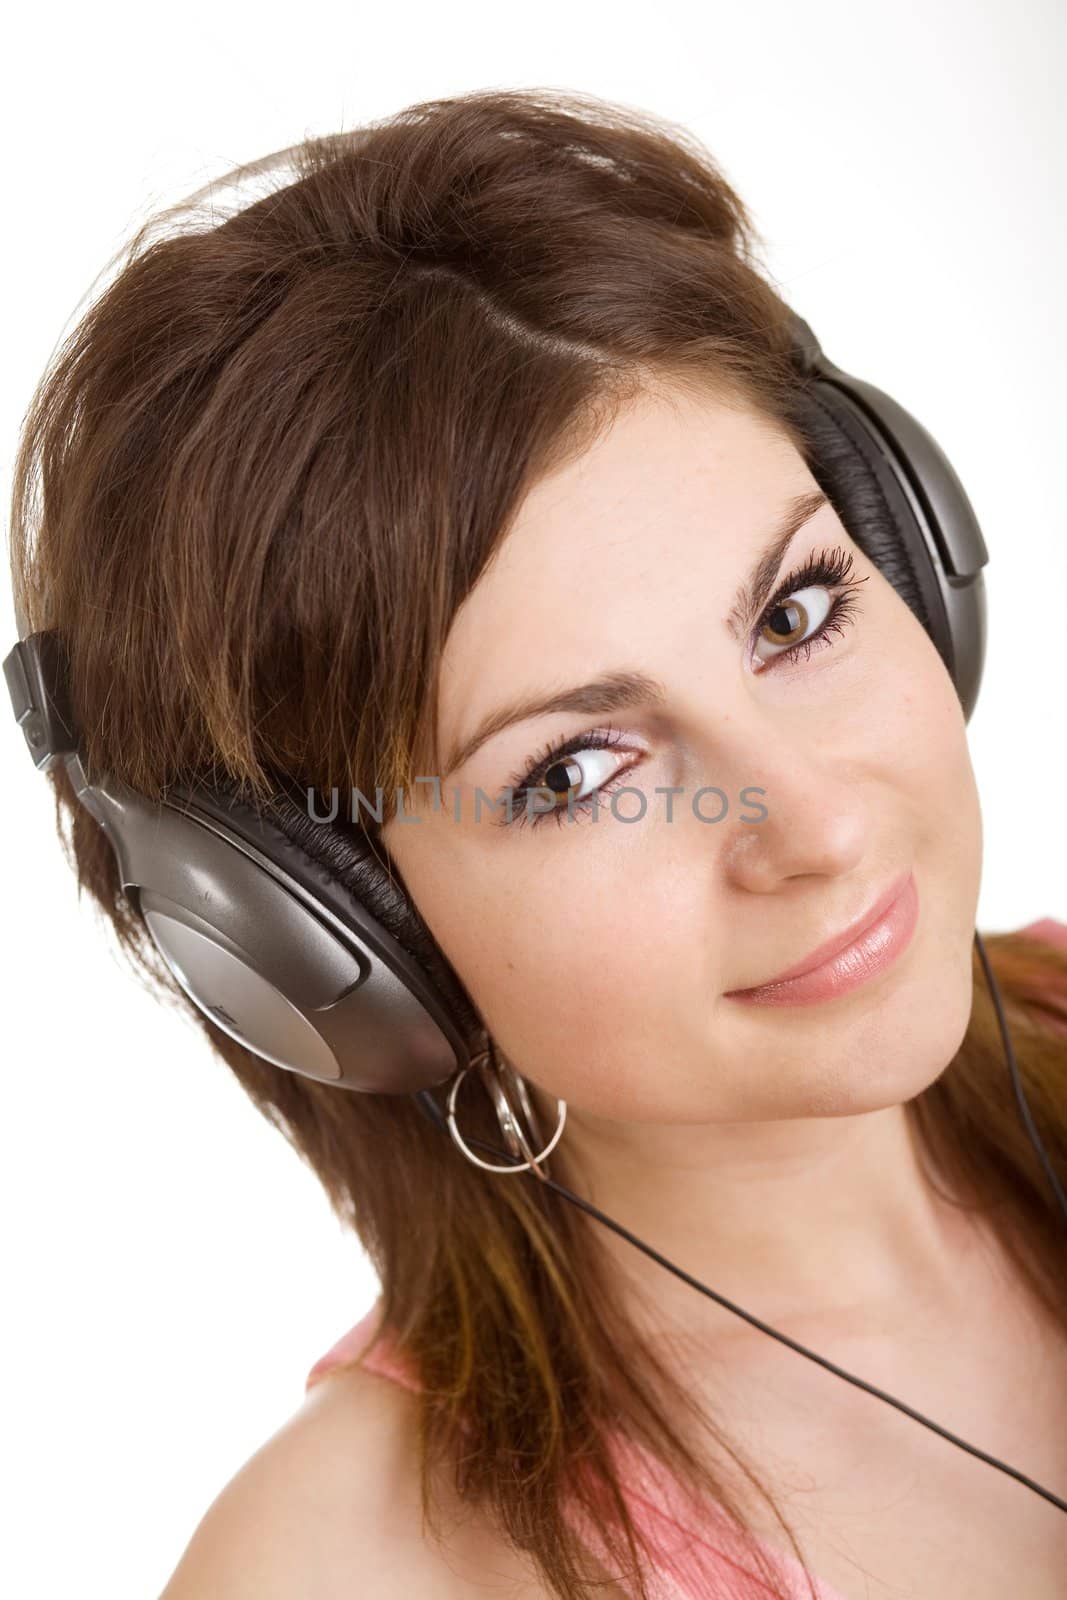 The woman in headphone listening to music